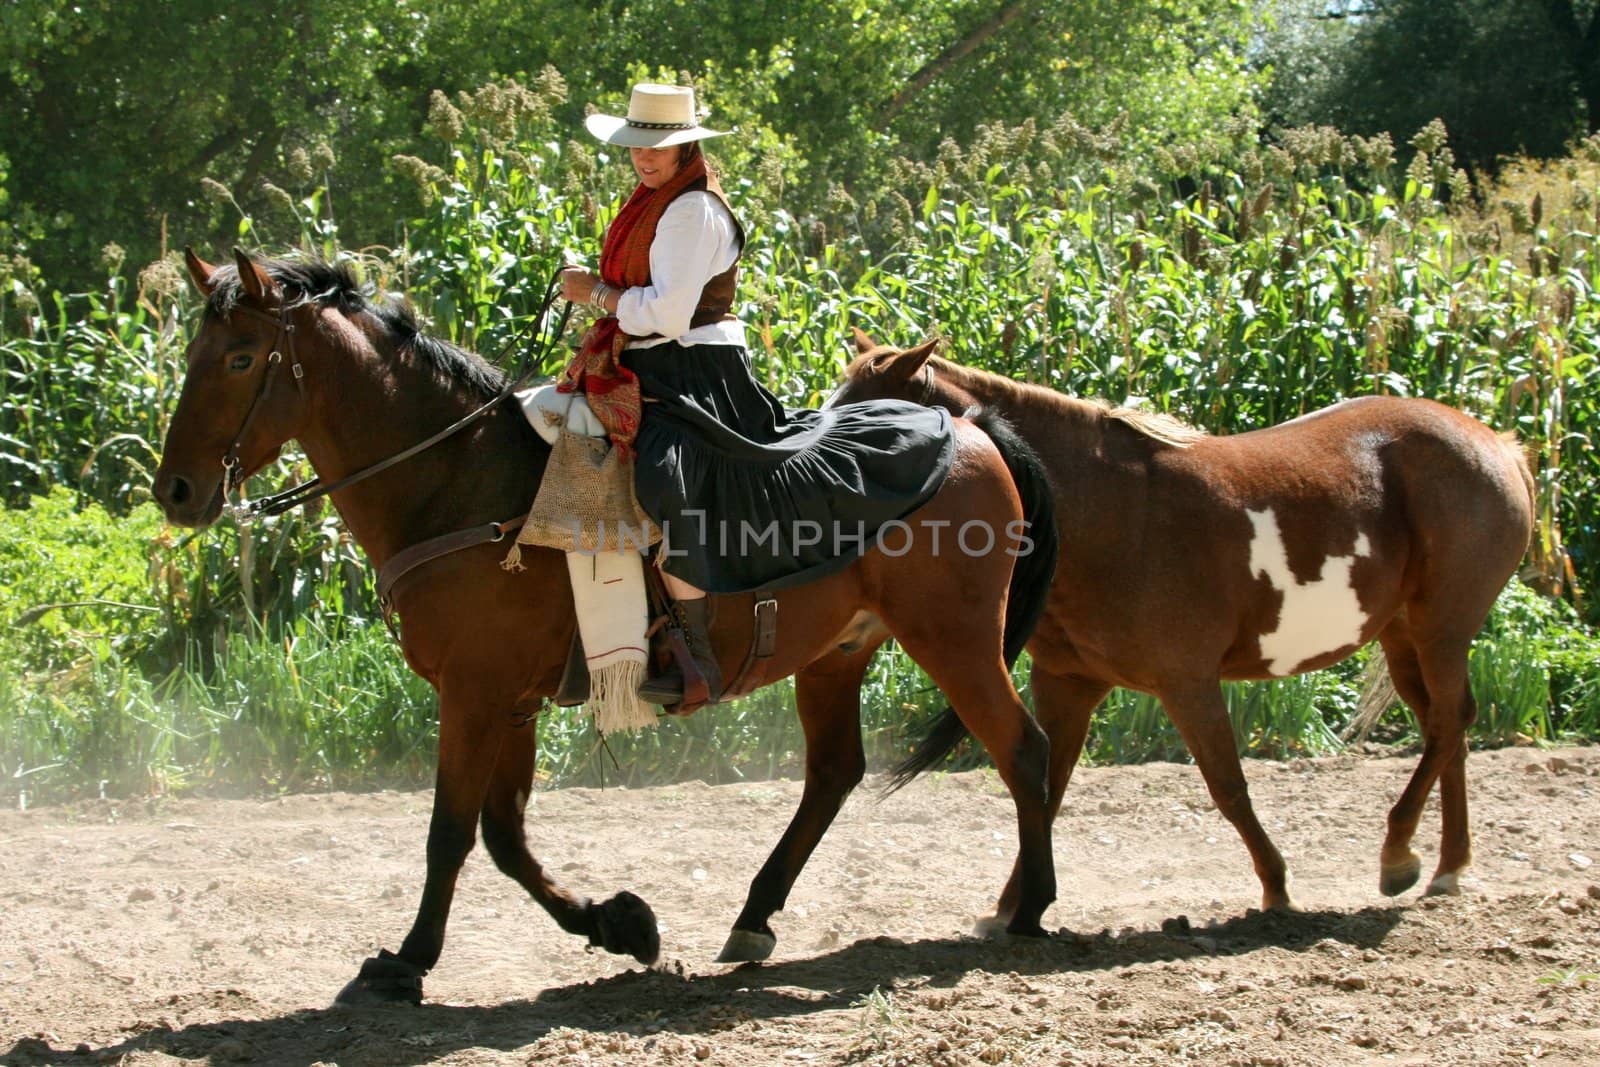 Cowgirl bringing in the horses along a dusty trail on a centuries old hacienda in New Mexico